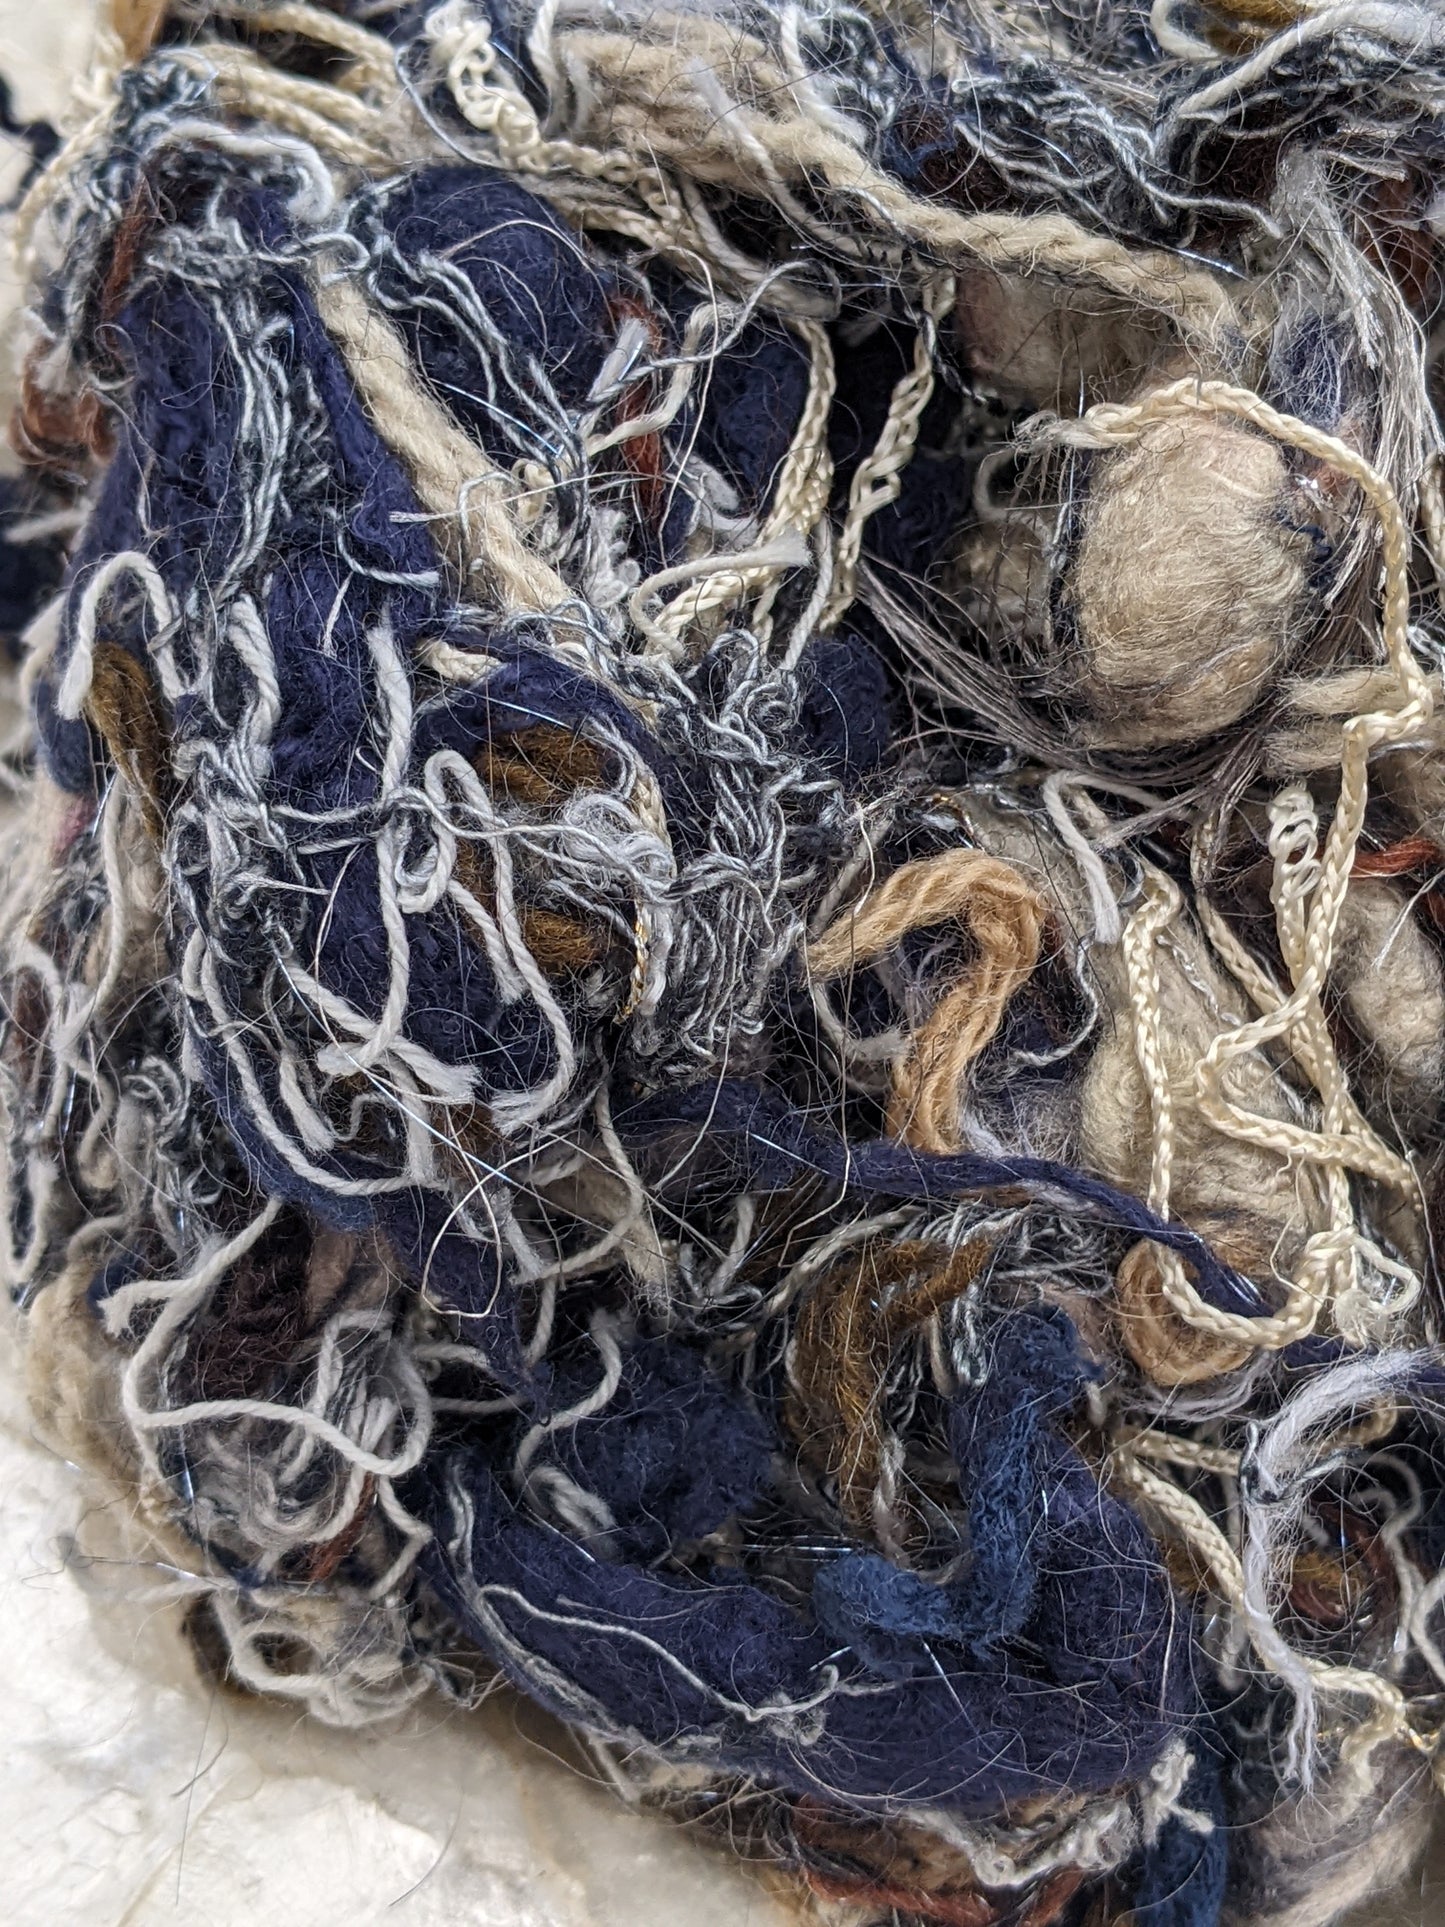 HOKUSAI Luxury Recycled Fiber Thread Texture Blend for Carding 3 oz